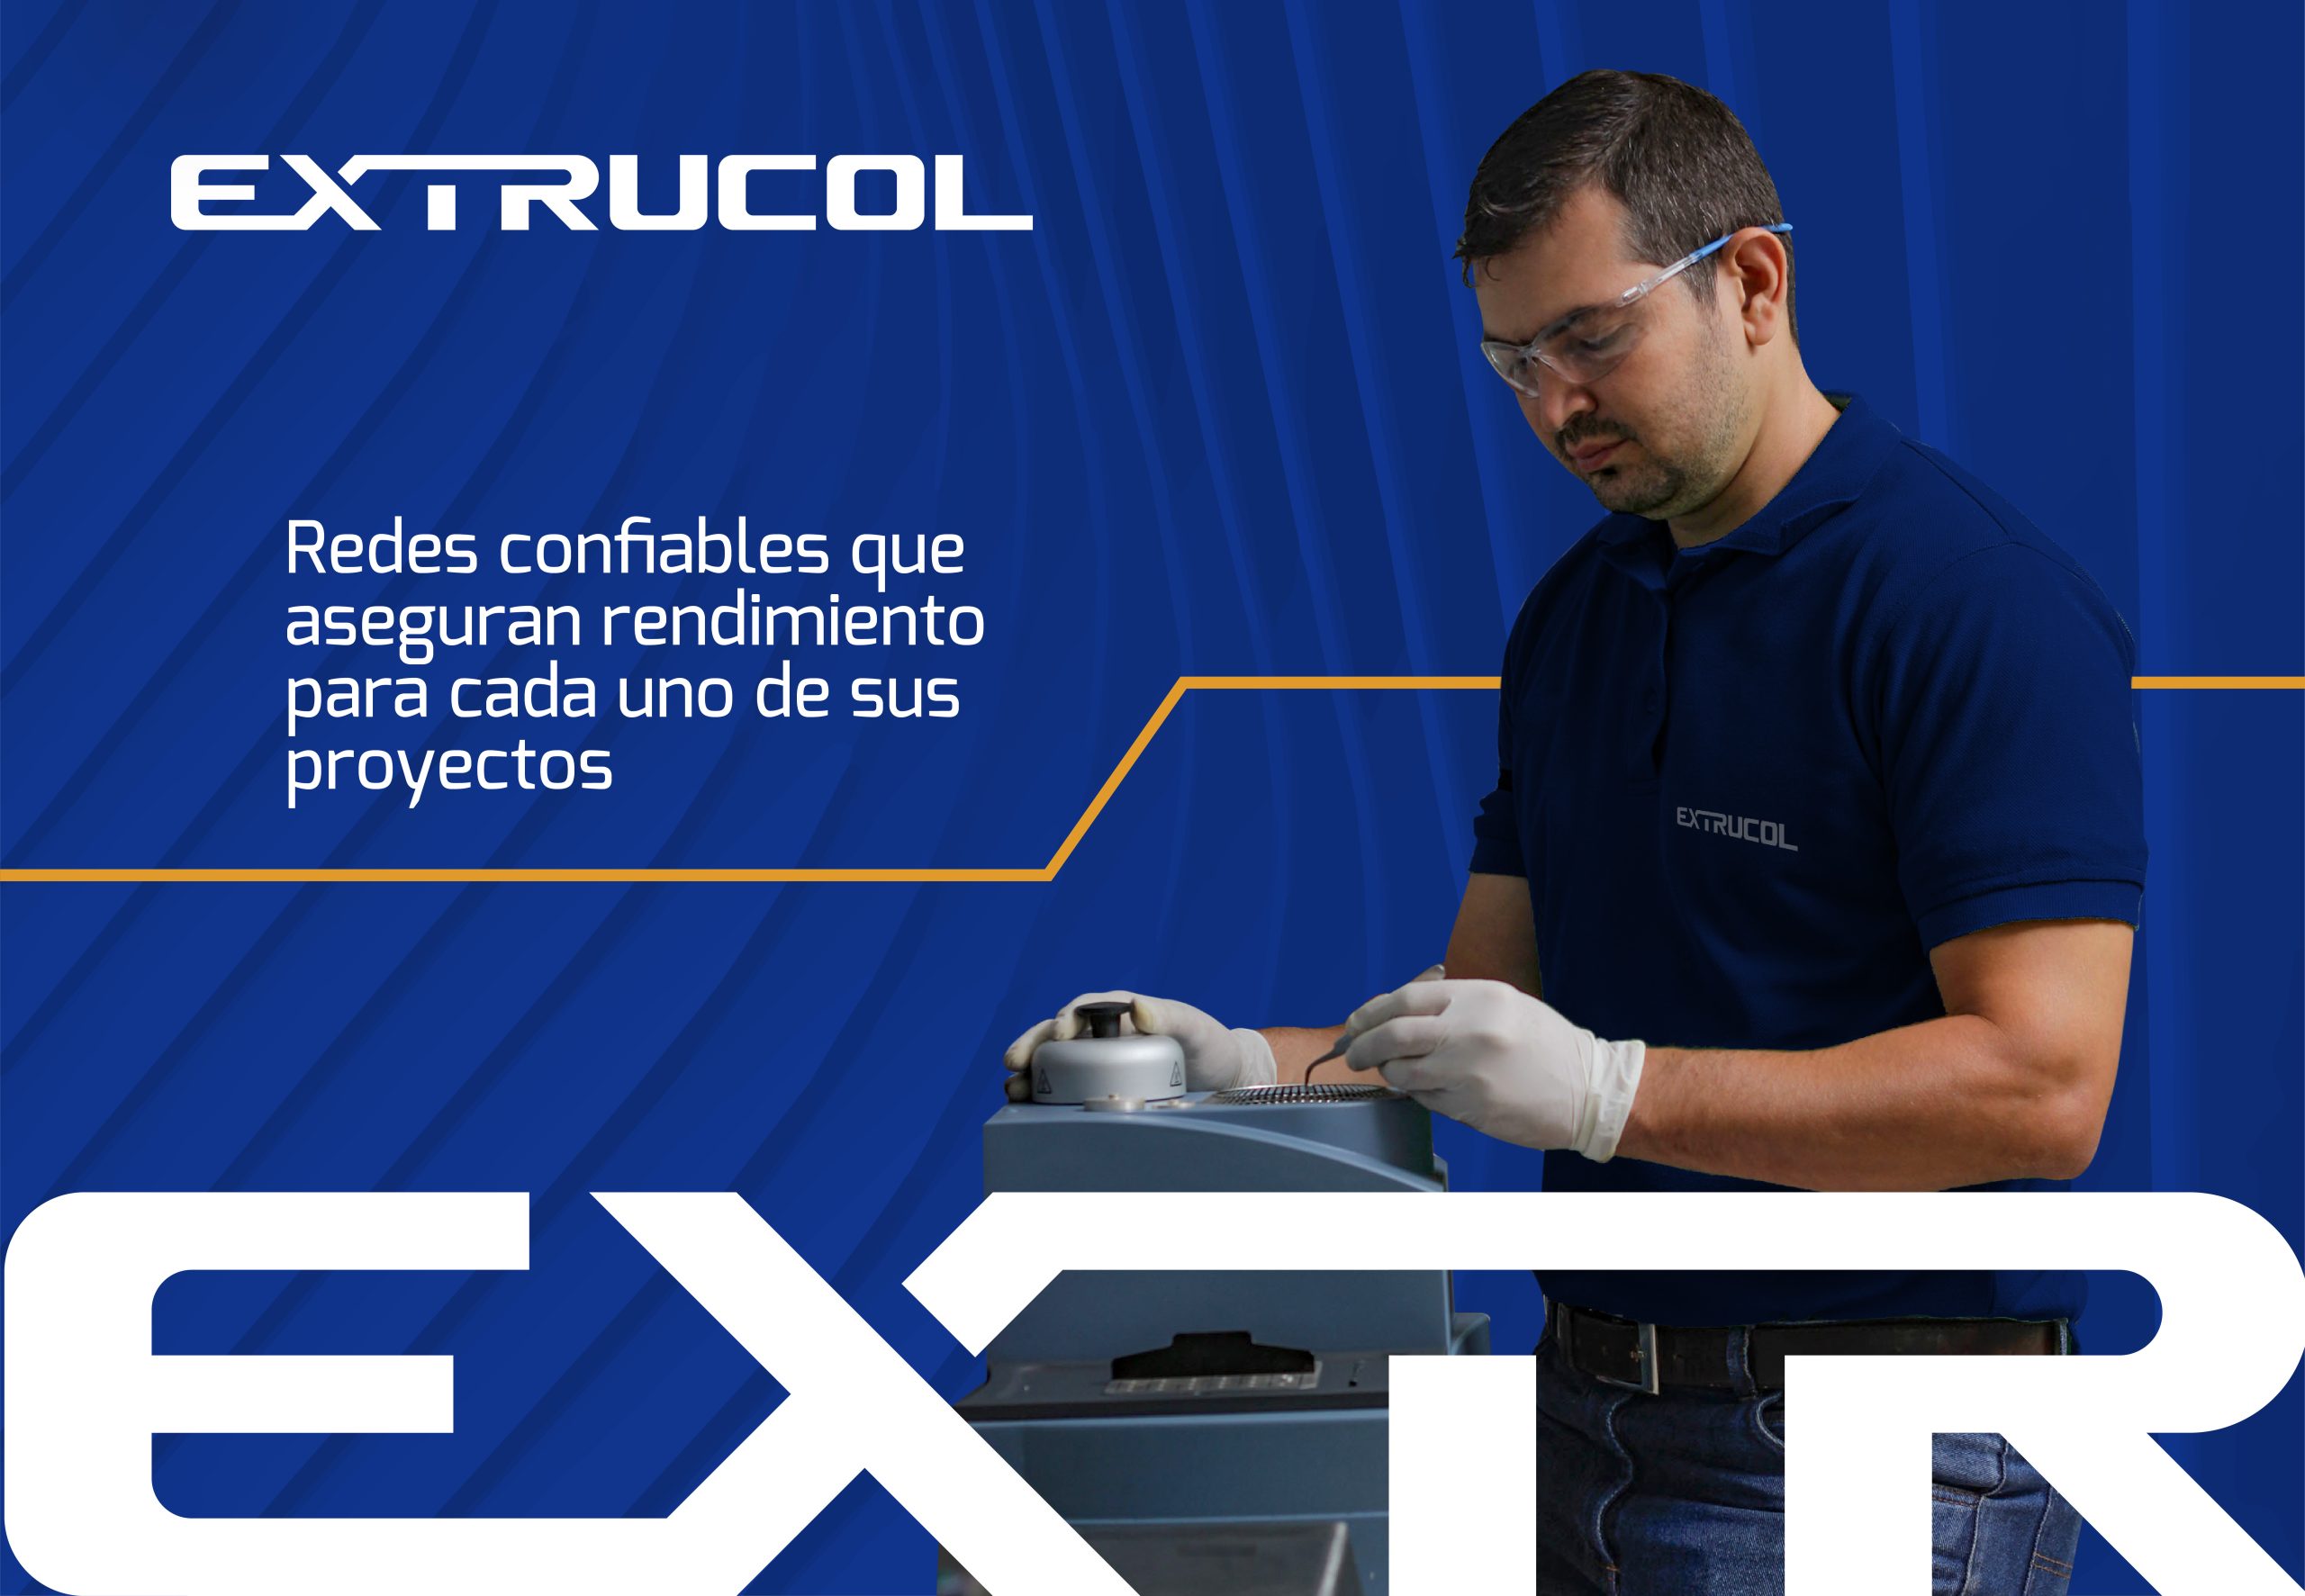 Extrucol redes confiables